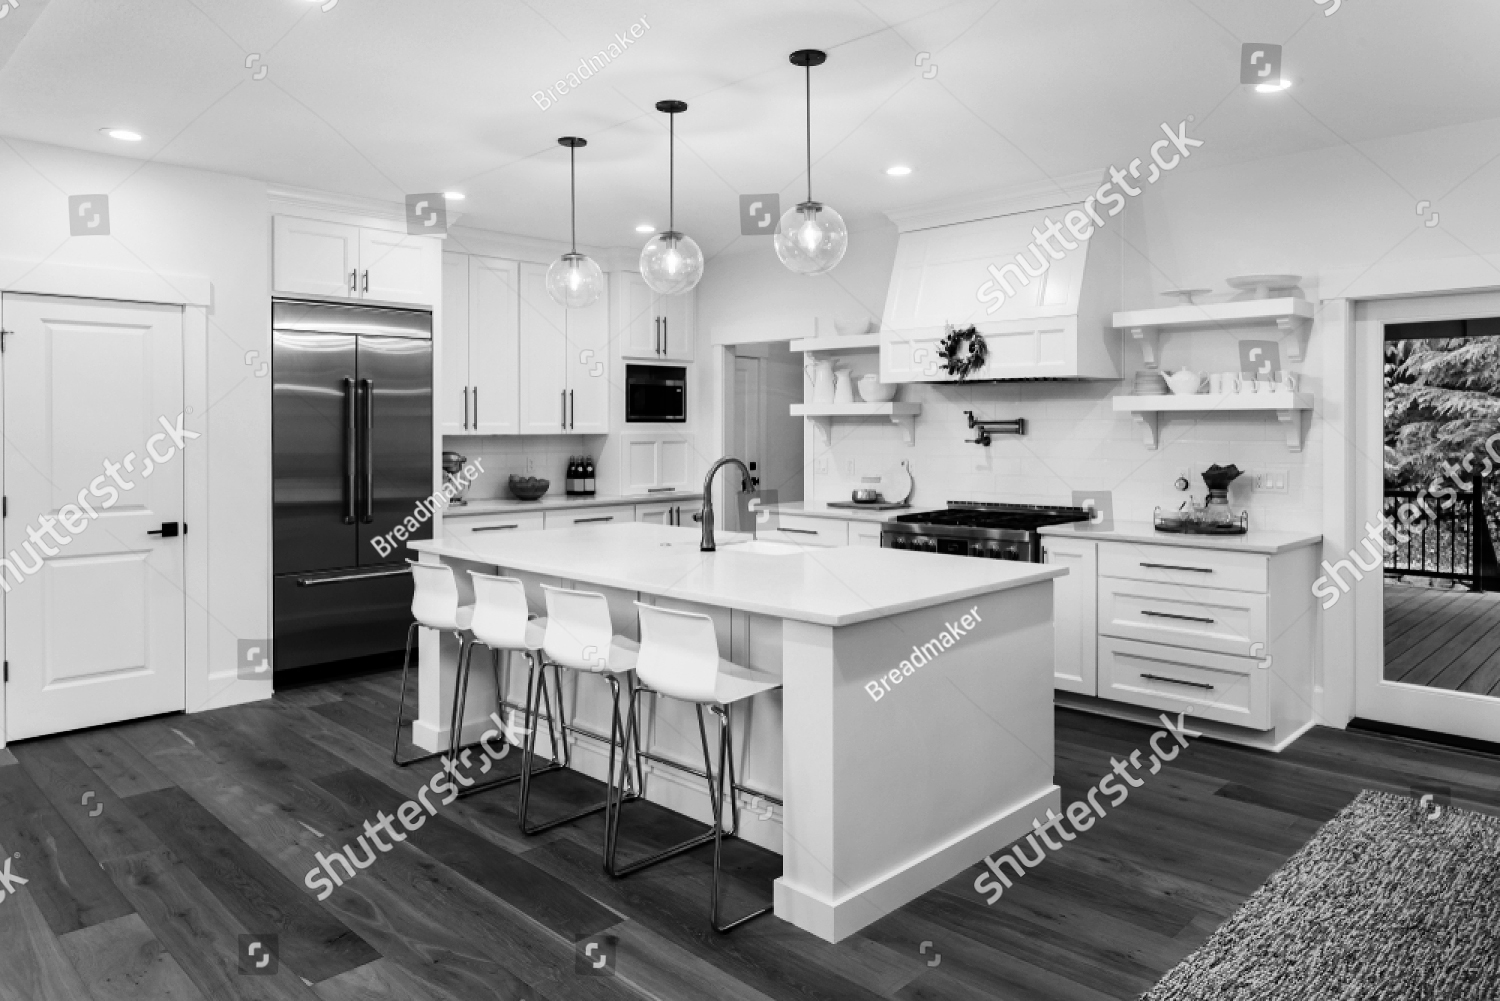 stock-photo-beautiful-white-kitchen-in-new-luxury-home-with-island-pendant-lights-hardwood-floors-and-1213273798_bw